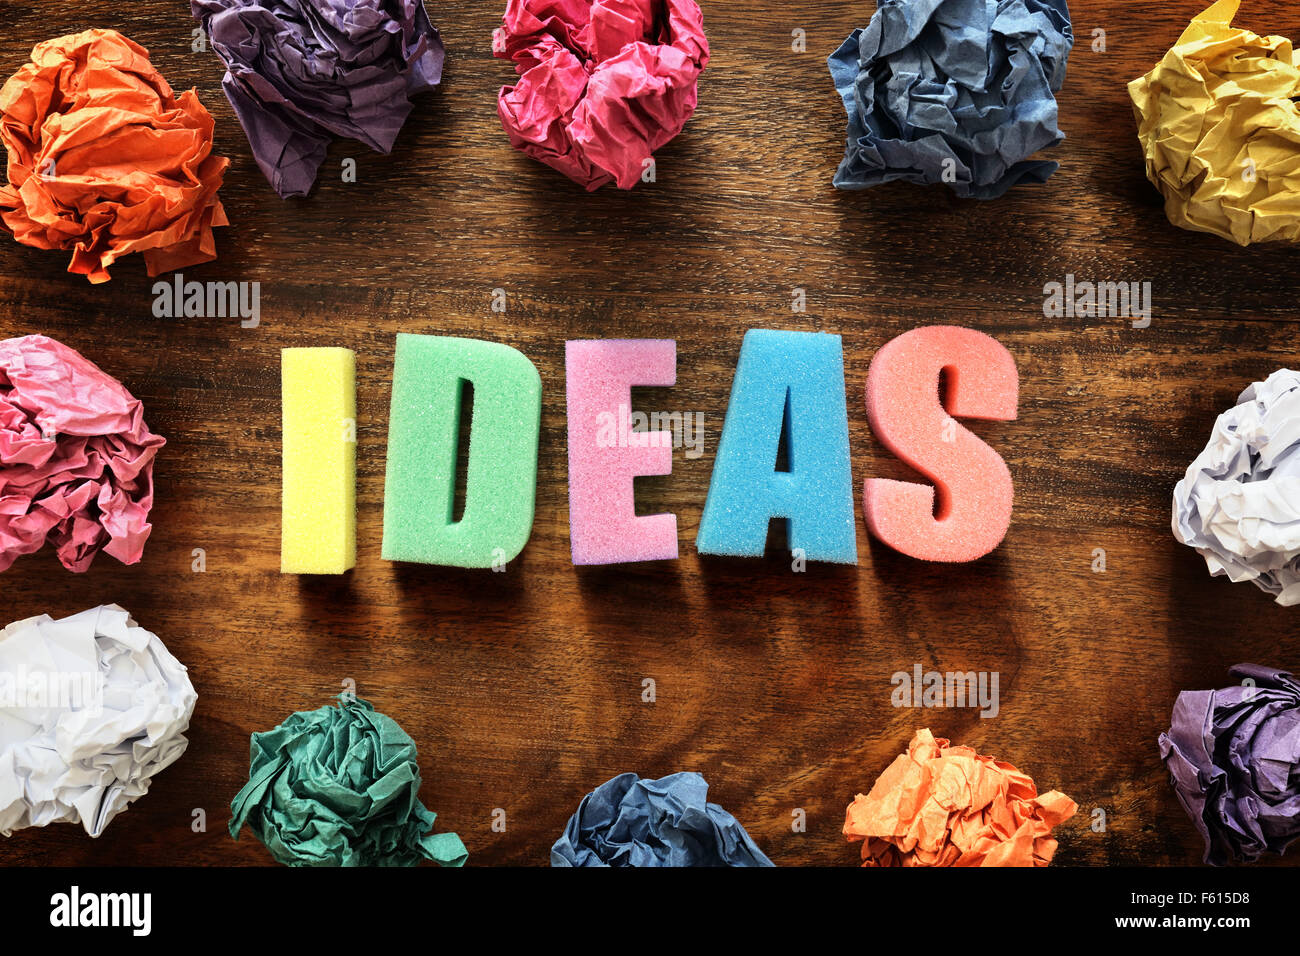 Design thought process with the word ideas and crumpled paper balls Stock Photo